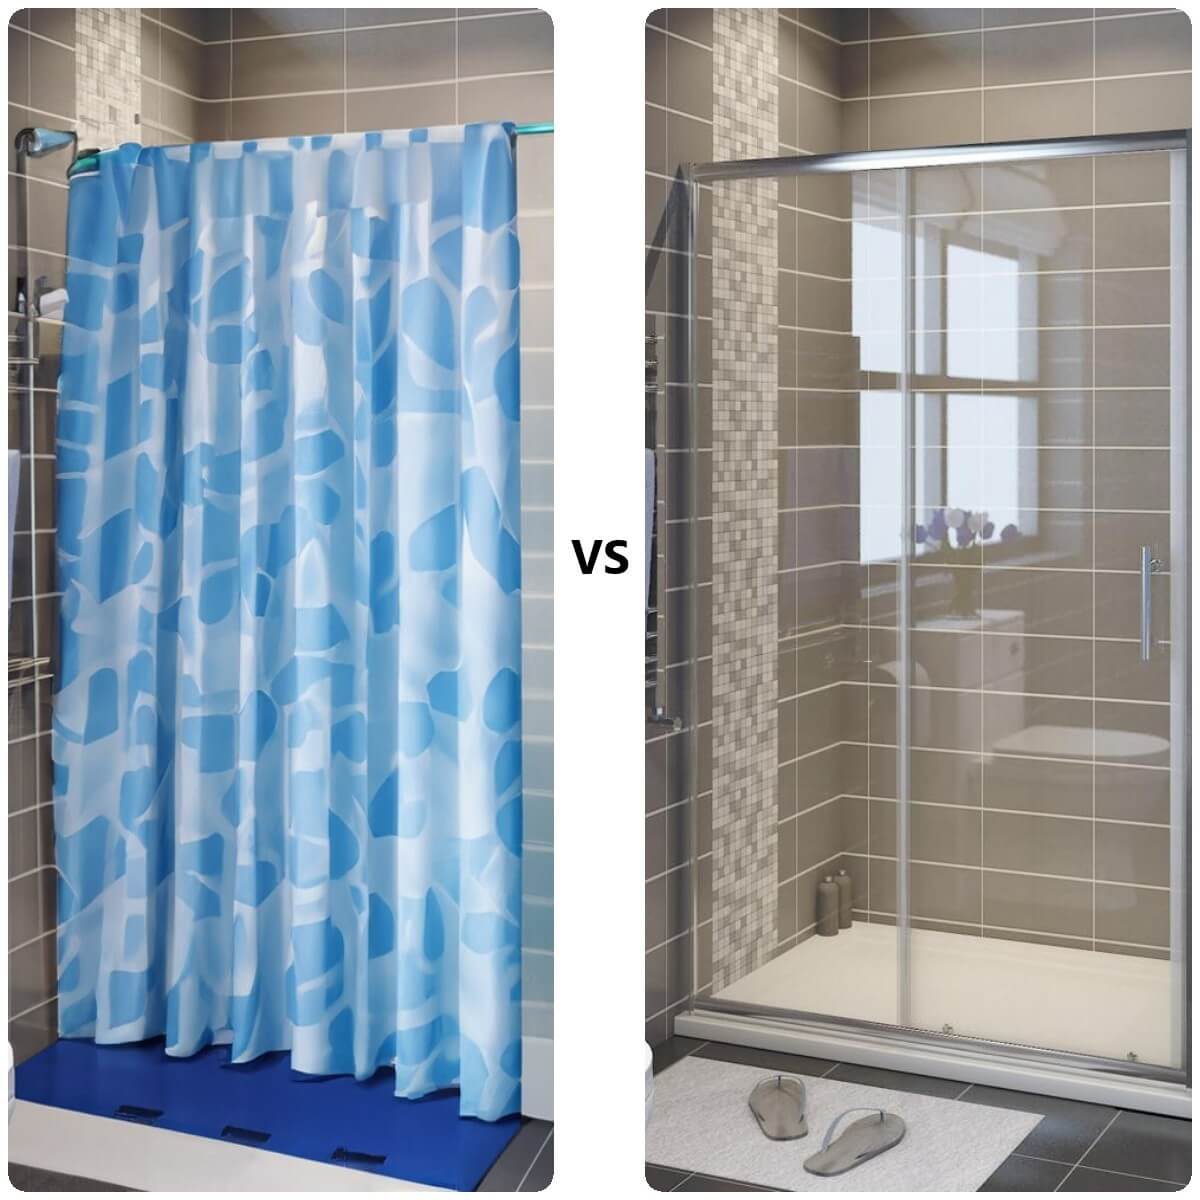 Shower Curtains vs Shower Screens: Which Is Better for Aussie Homeowners?